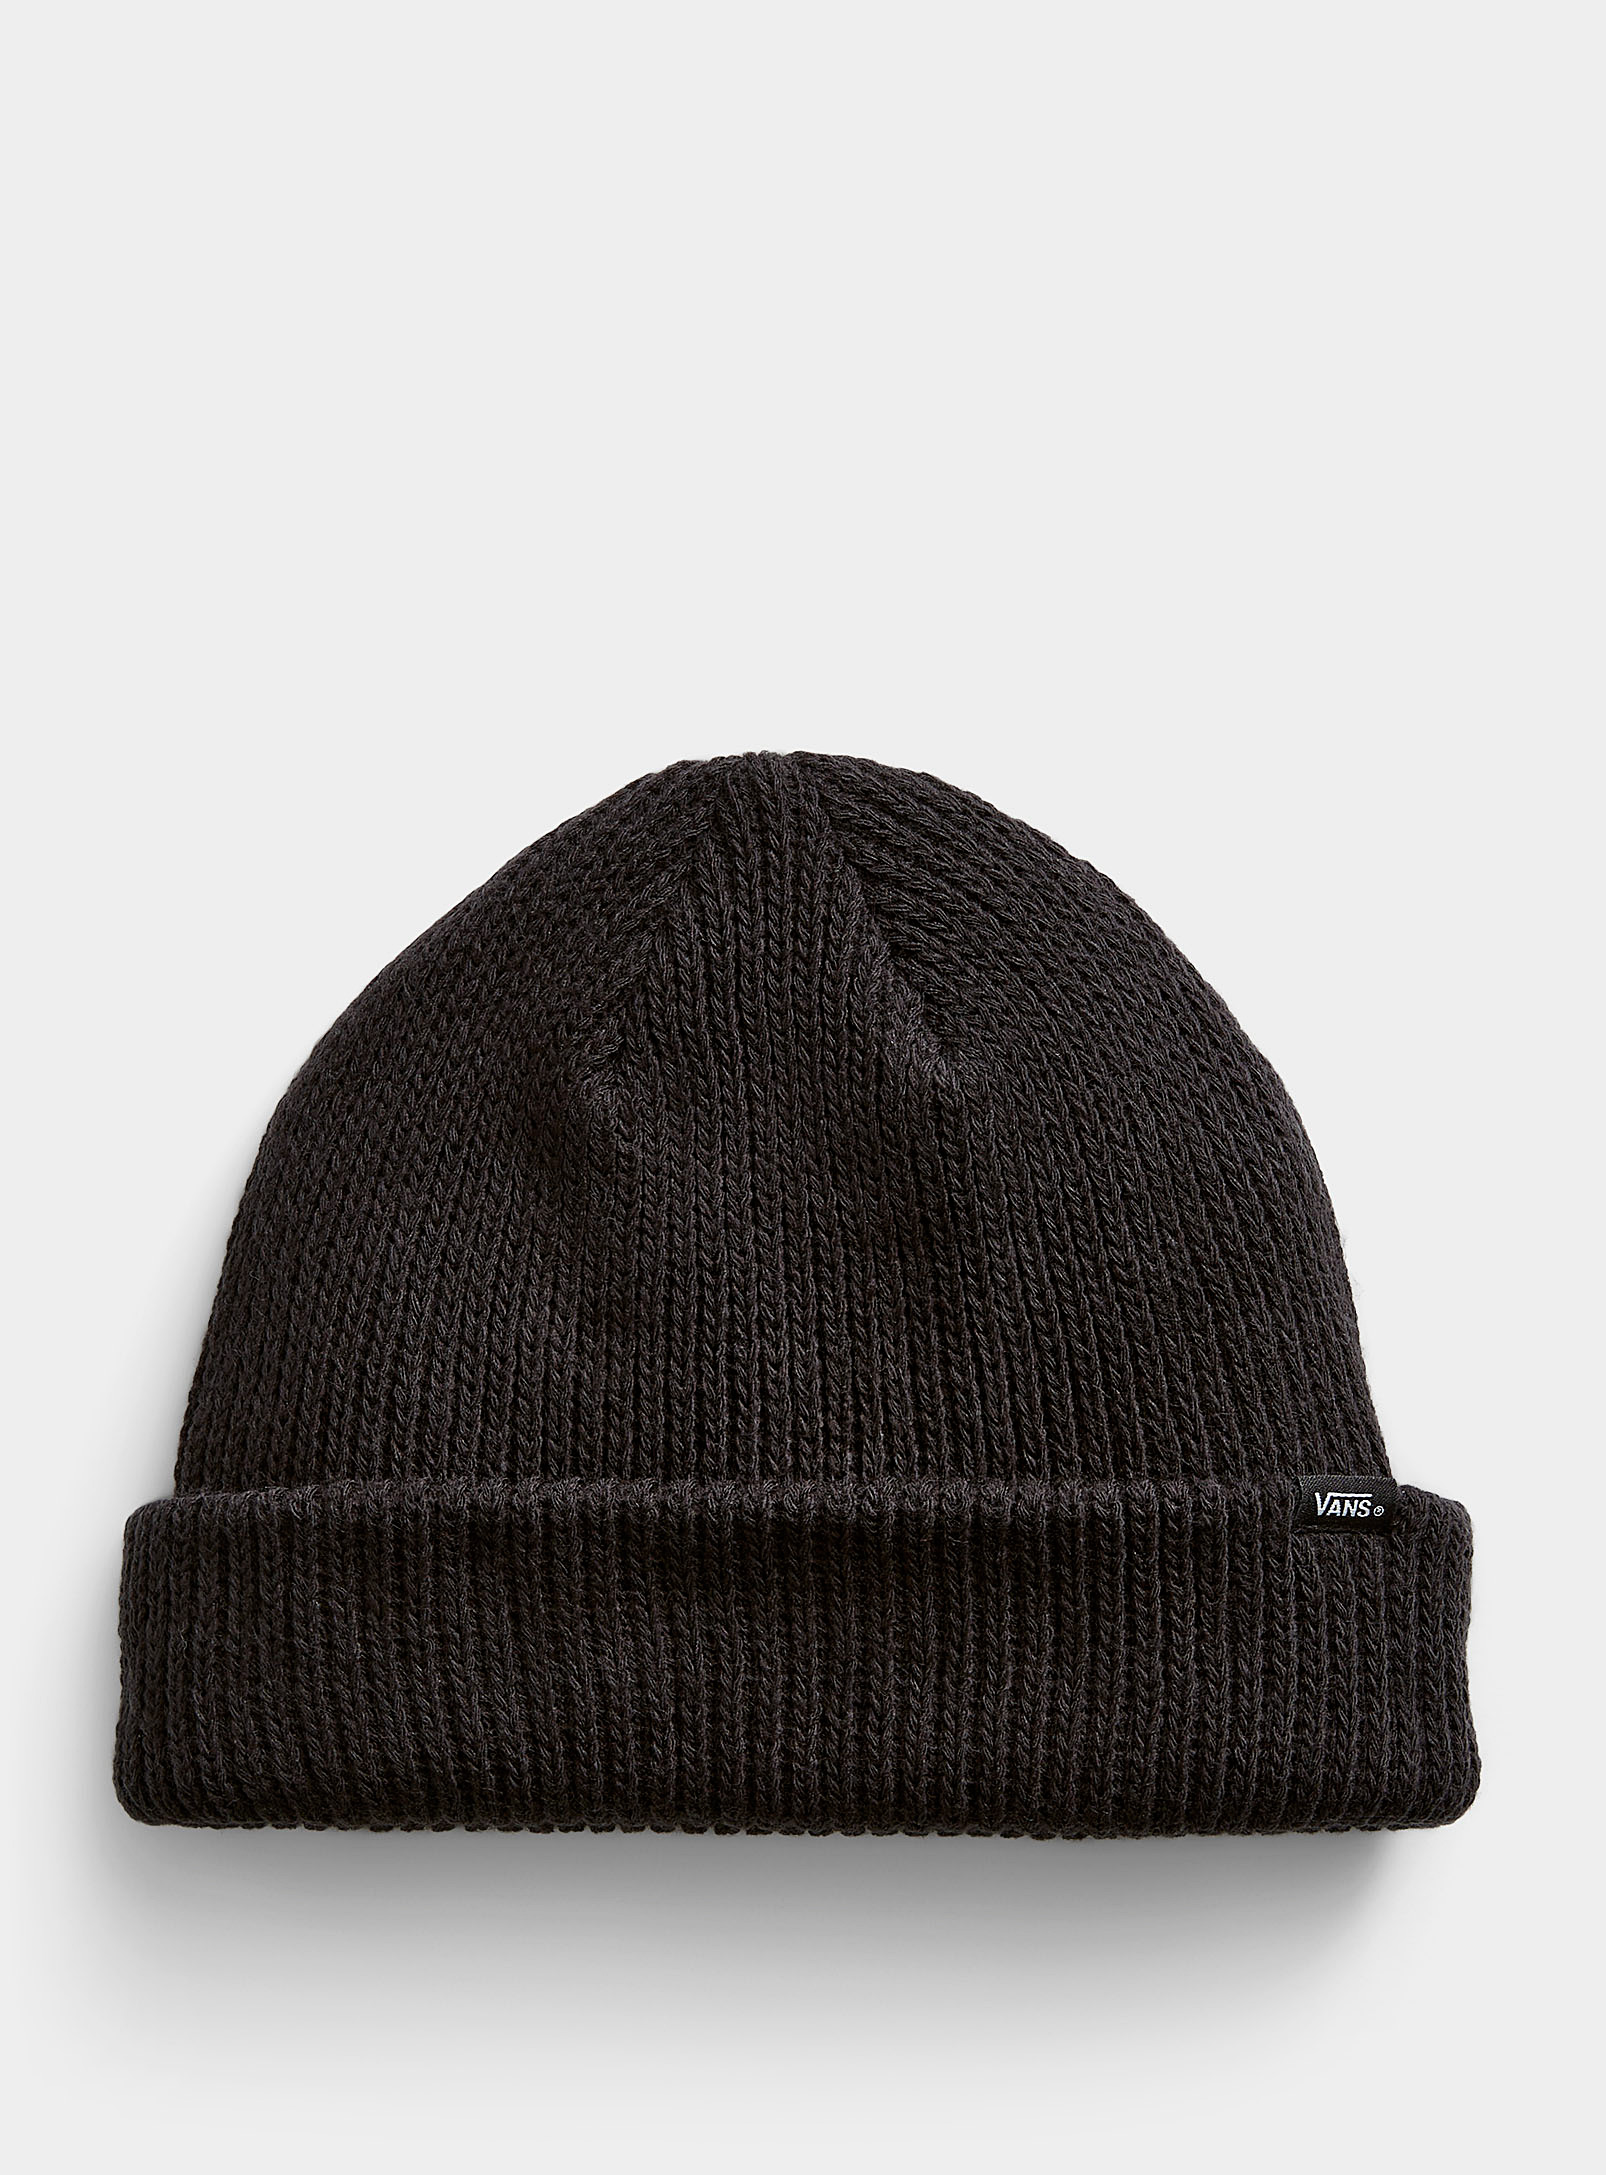 Vans - Women's Small-rib solid Tuque Hat